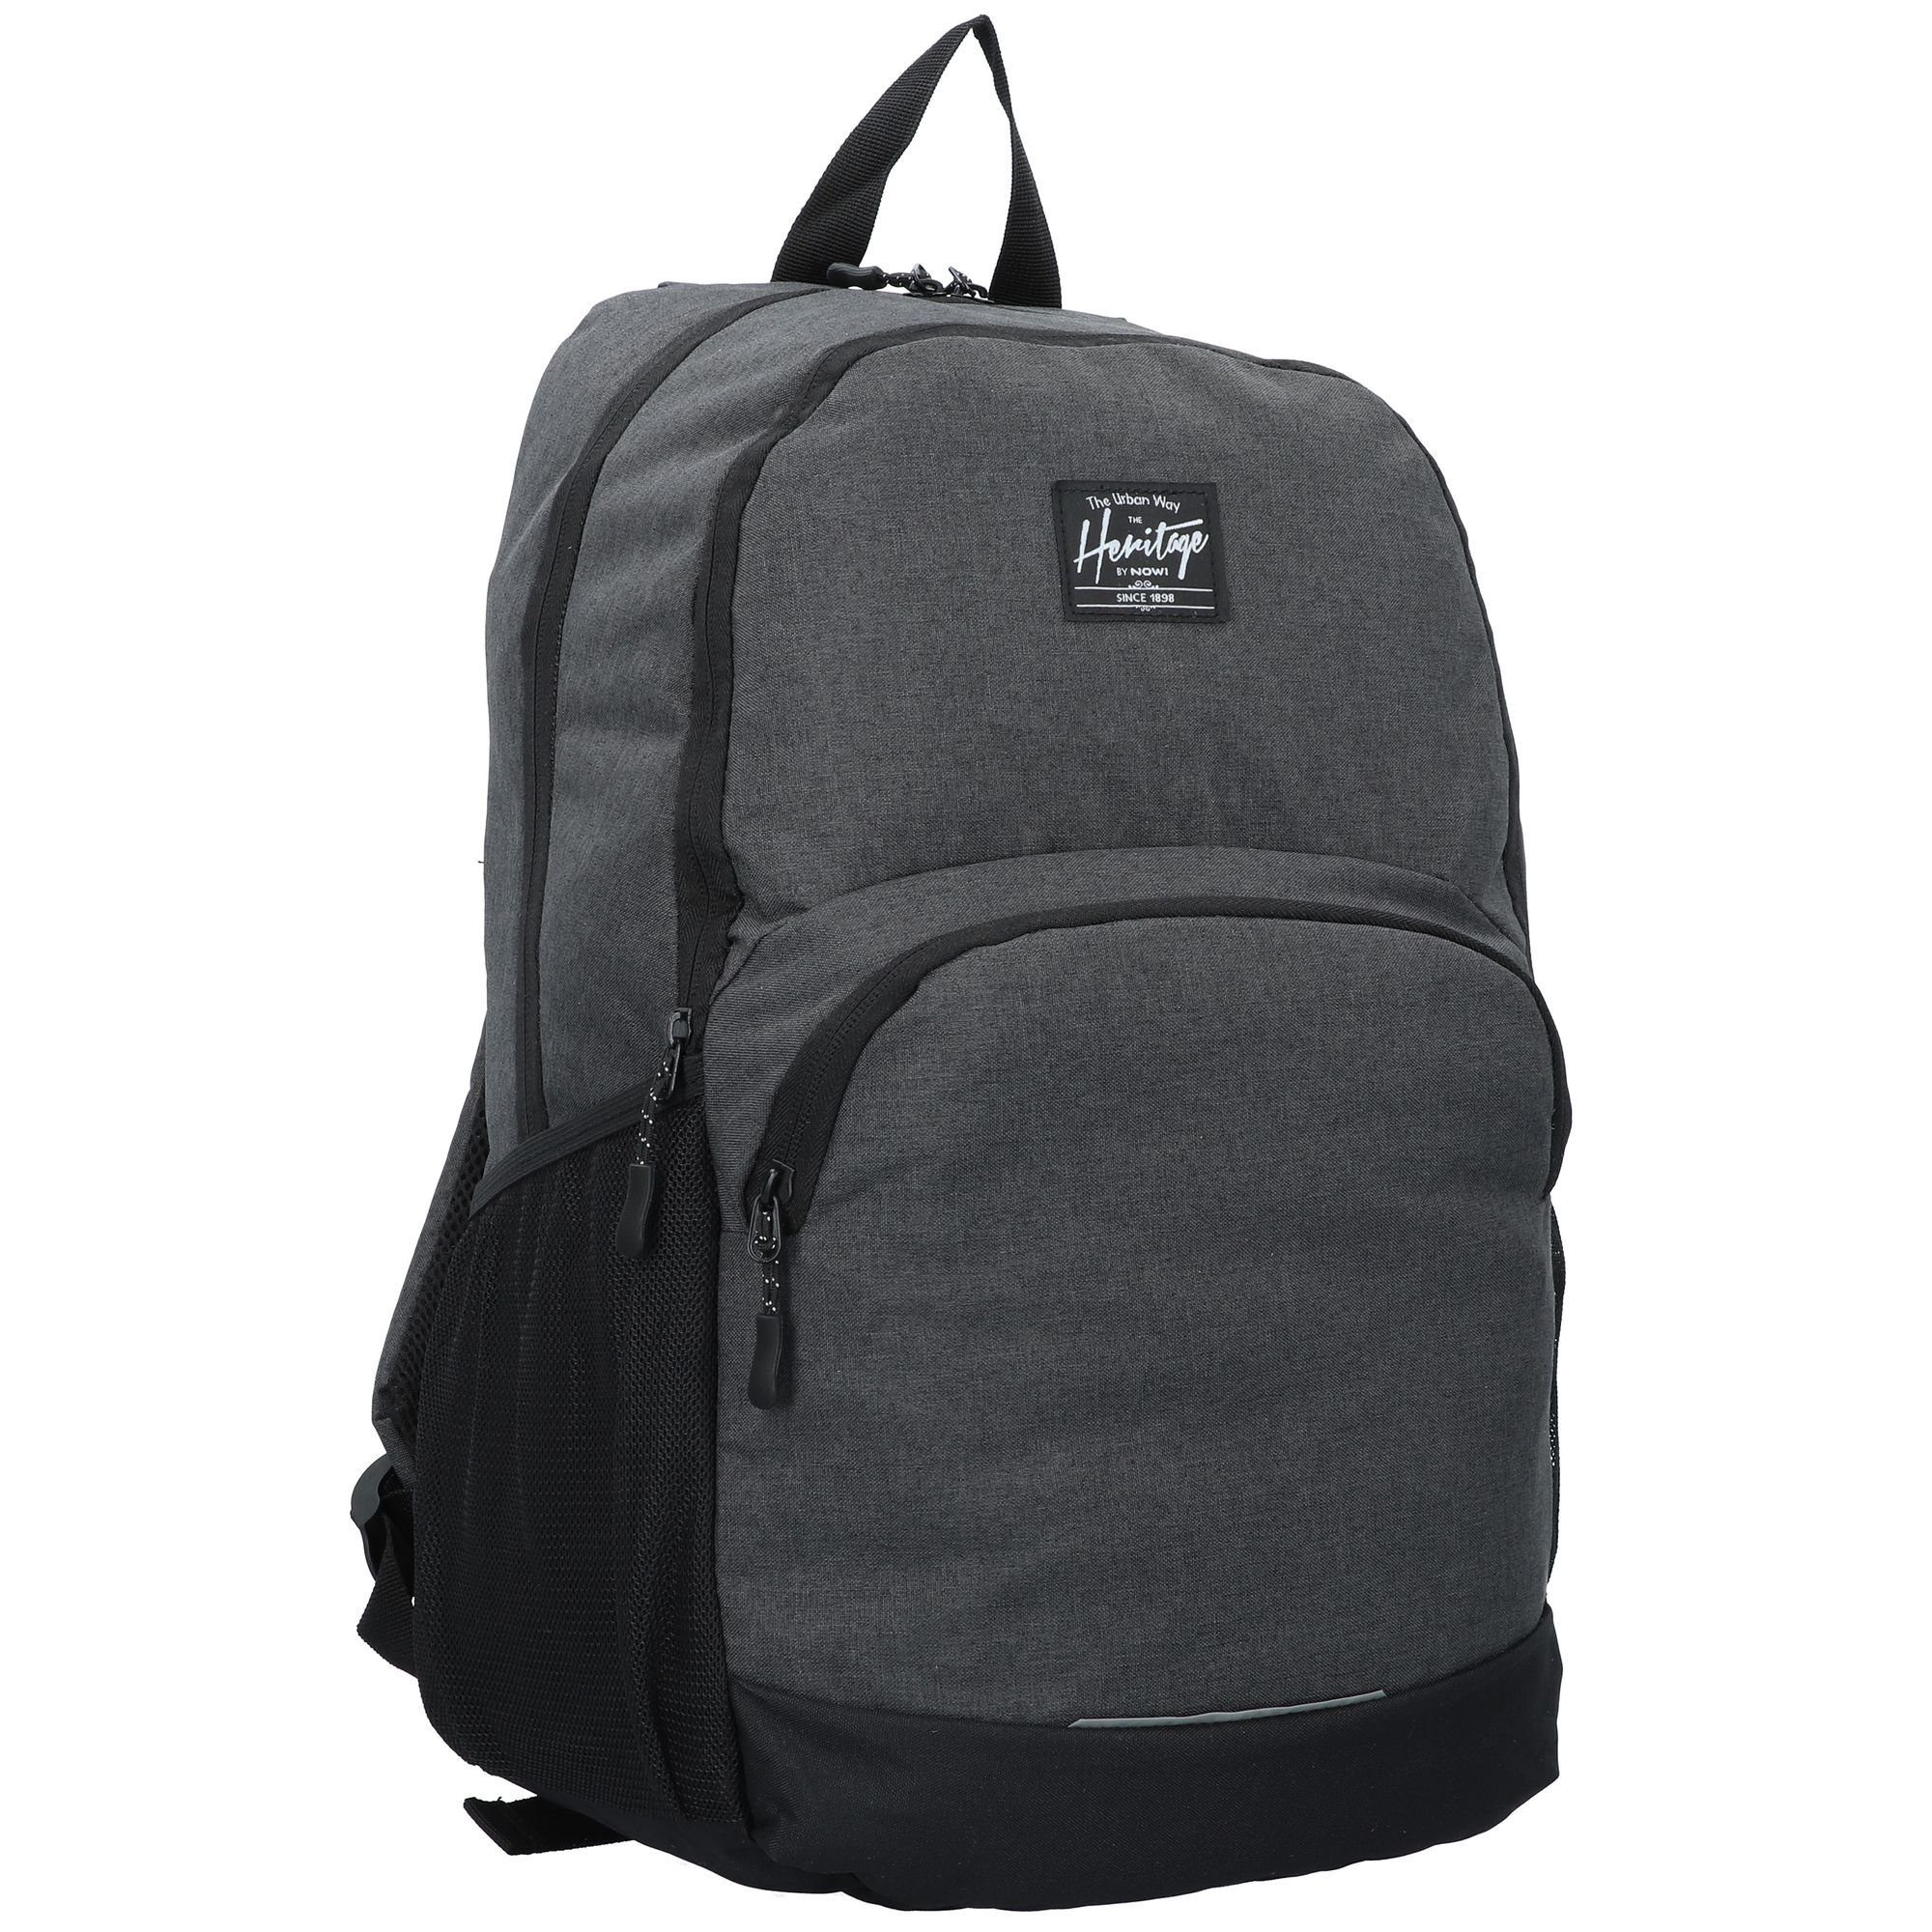 NOWI Polyester Daypack,